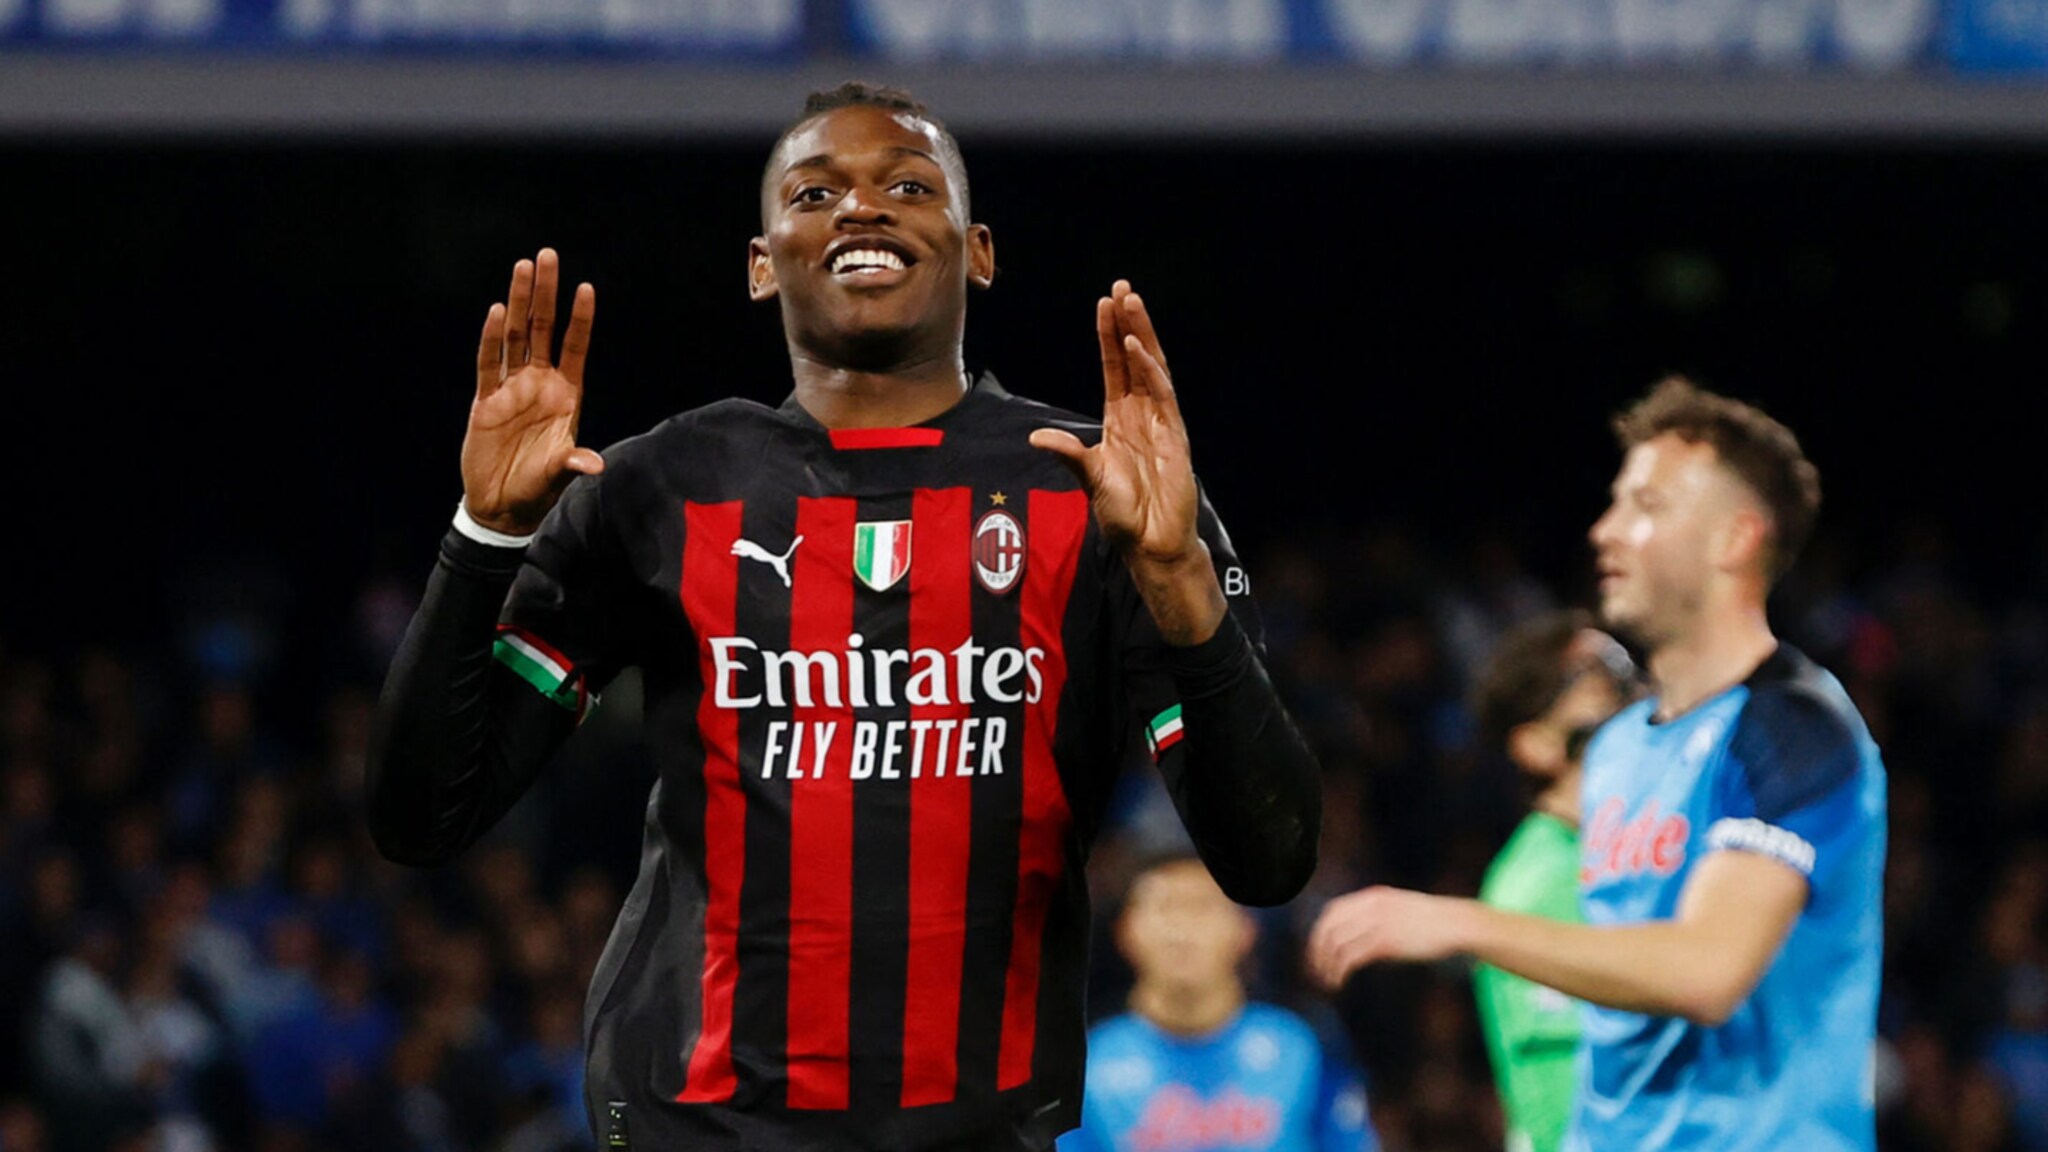 AC Milan played their way to victory: Beat league leaders Napoli 4-0